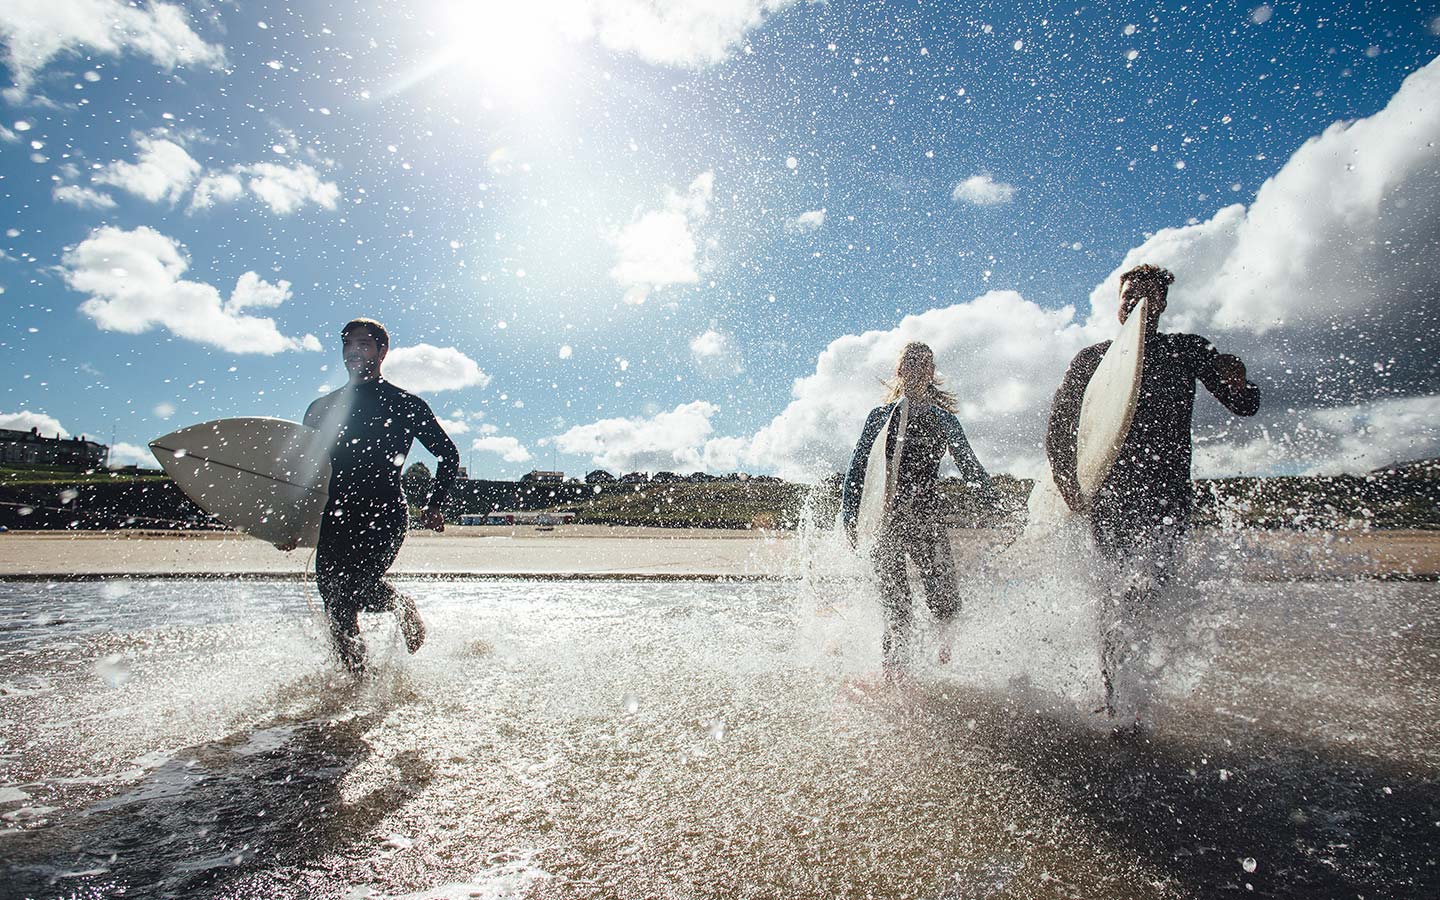 3 people with surfboards running in the water